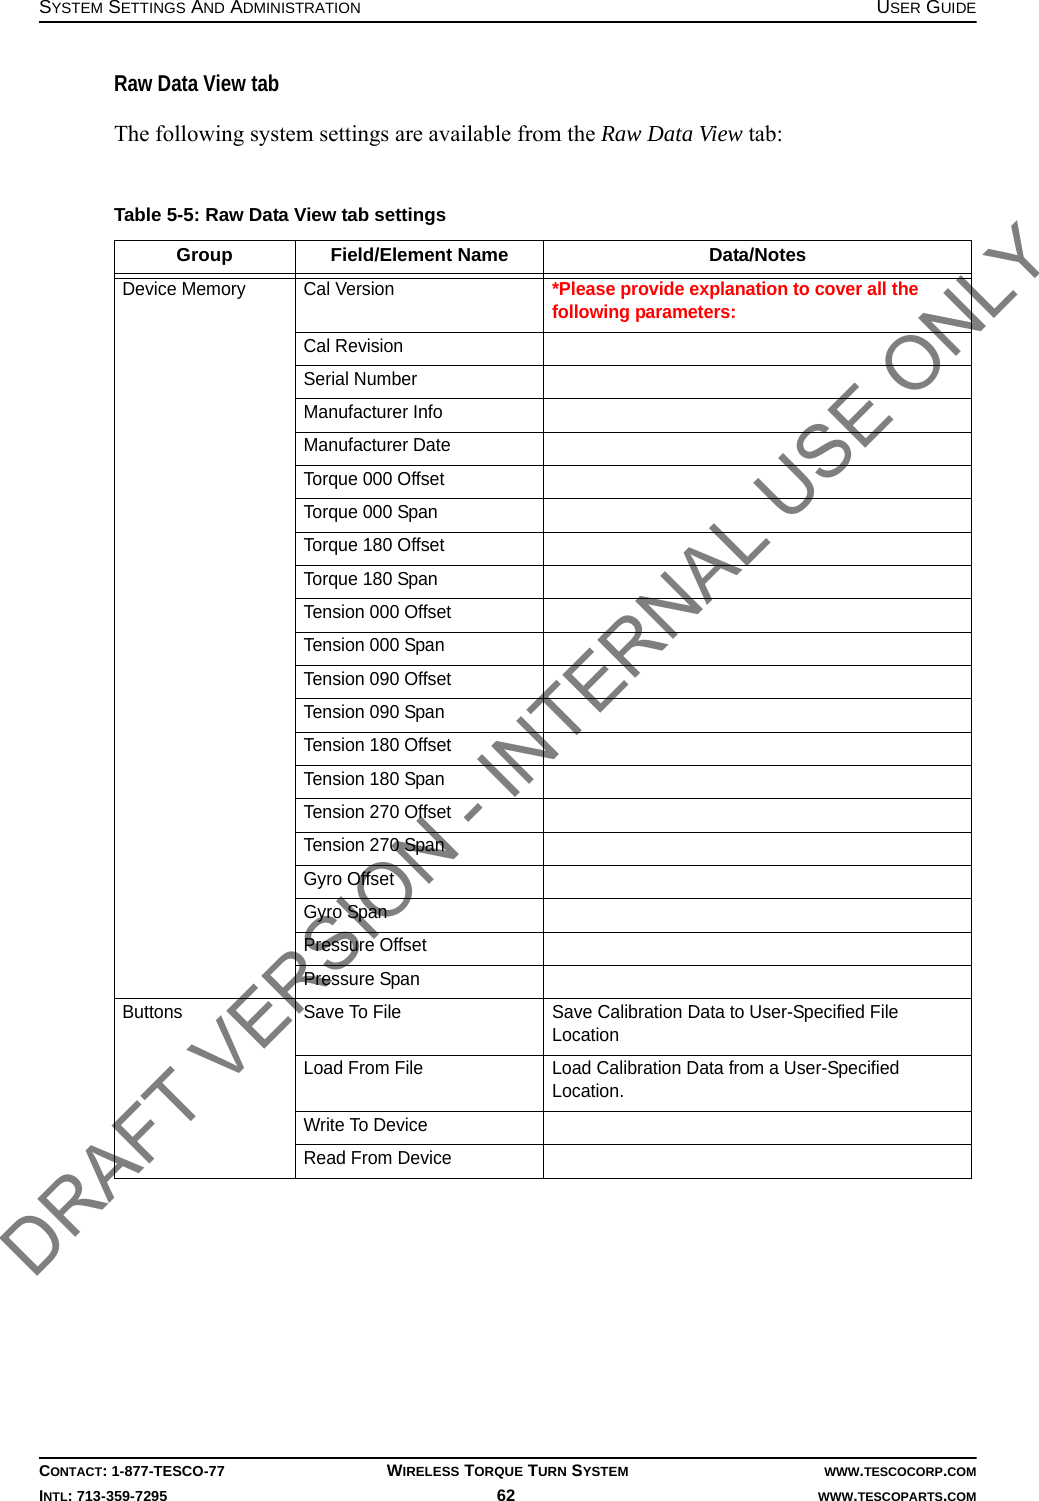 SYSTEM SETTINGS AND ADMINISTRATION USER GUIDECONTACT: 1-877-TESCO-77 WIRELESS TORQUE TURN SYSTEM WWW.TESCOCORP.COMINTL: 713-359-7295 62    WWW.TESCOPARTS.COMRaw Data View tabThe following system settings are available from the Raw Data View tab:Table 5-5: Raw Data View tab settingsGroup Field/Element Name Data/NotesDevice Memory Cal Version*Please provide explanation to cover all the following parameters:Cal RevisionSerial NumberManufacturer InfoManufacturer DateTorque 000 OffsetTorque 000 SpanTorque 180 OffsetTorque 180 SpanTension 000 OffsetTension 000 SpanTension 090 OffsetTension 090 SpanTension 180 OffsetTension 180 SpanTension 270 OffsetTension 270 SpanGyro OffsetGyro SpanPressure OffsetPressure SpanButtons Save To File Save Calibration Data to User-Specified File LocationLoad From File Load Calibration Data from a User-Specified Location.Write To DeviceRead From DeviceDRAFT VERSION - INTERNAL USE ONLY